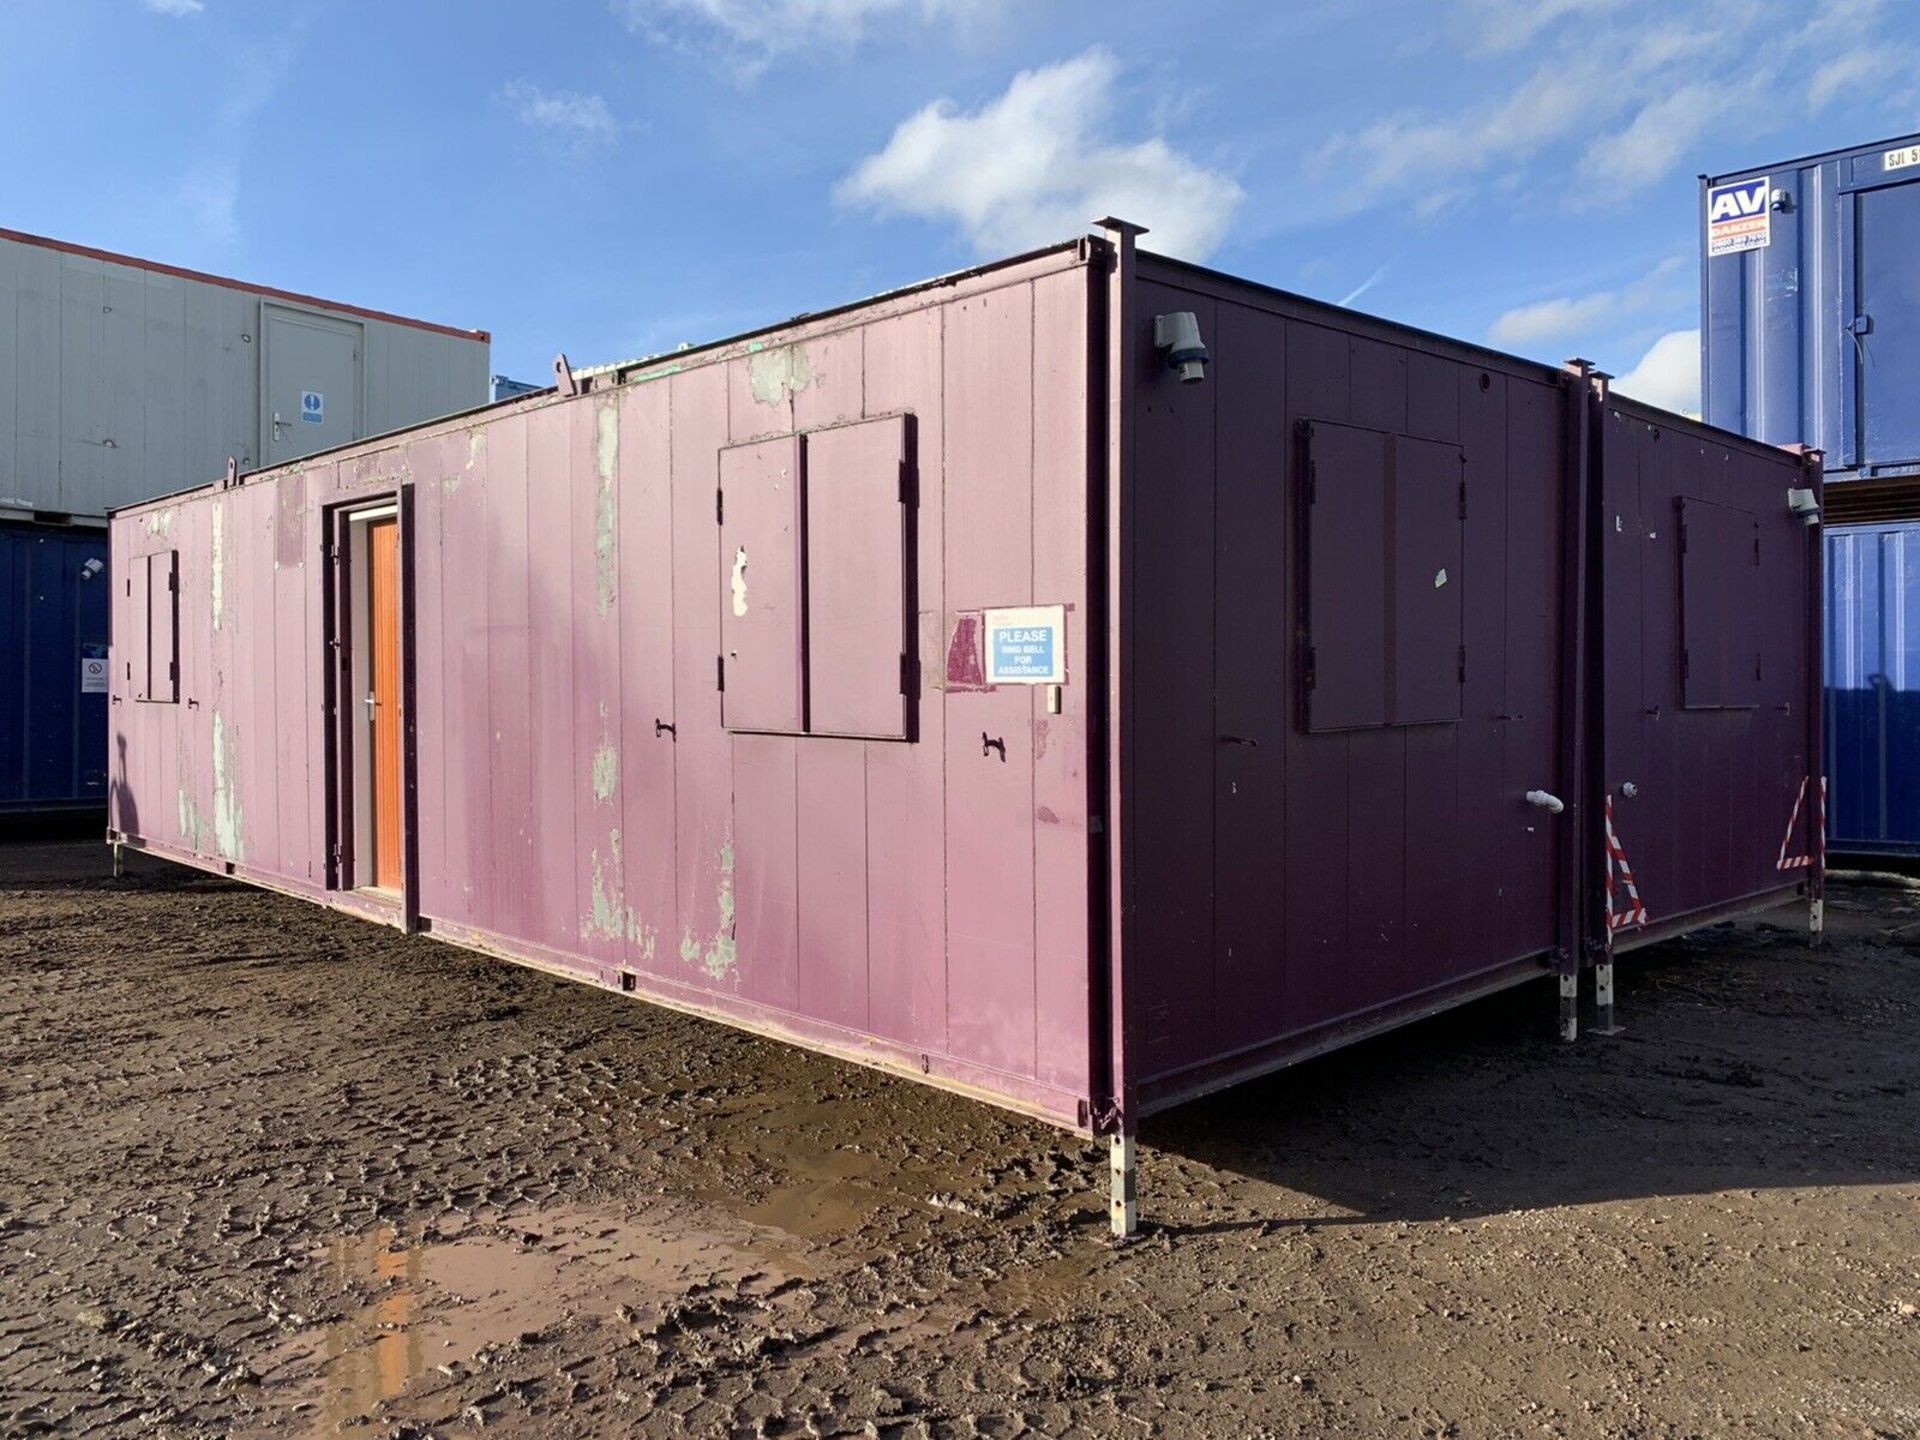 Portable Office Site Cabin Modular Building 32ft x 20ft Anti Vandal Steel - Image 2 of 8